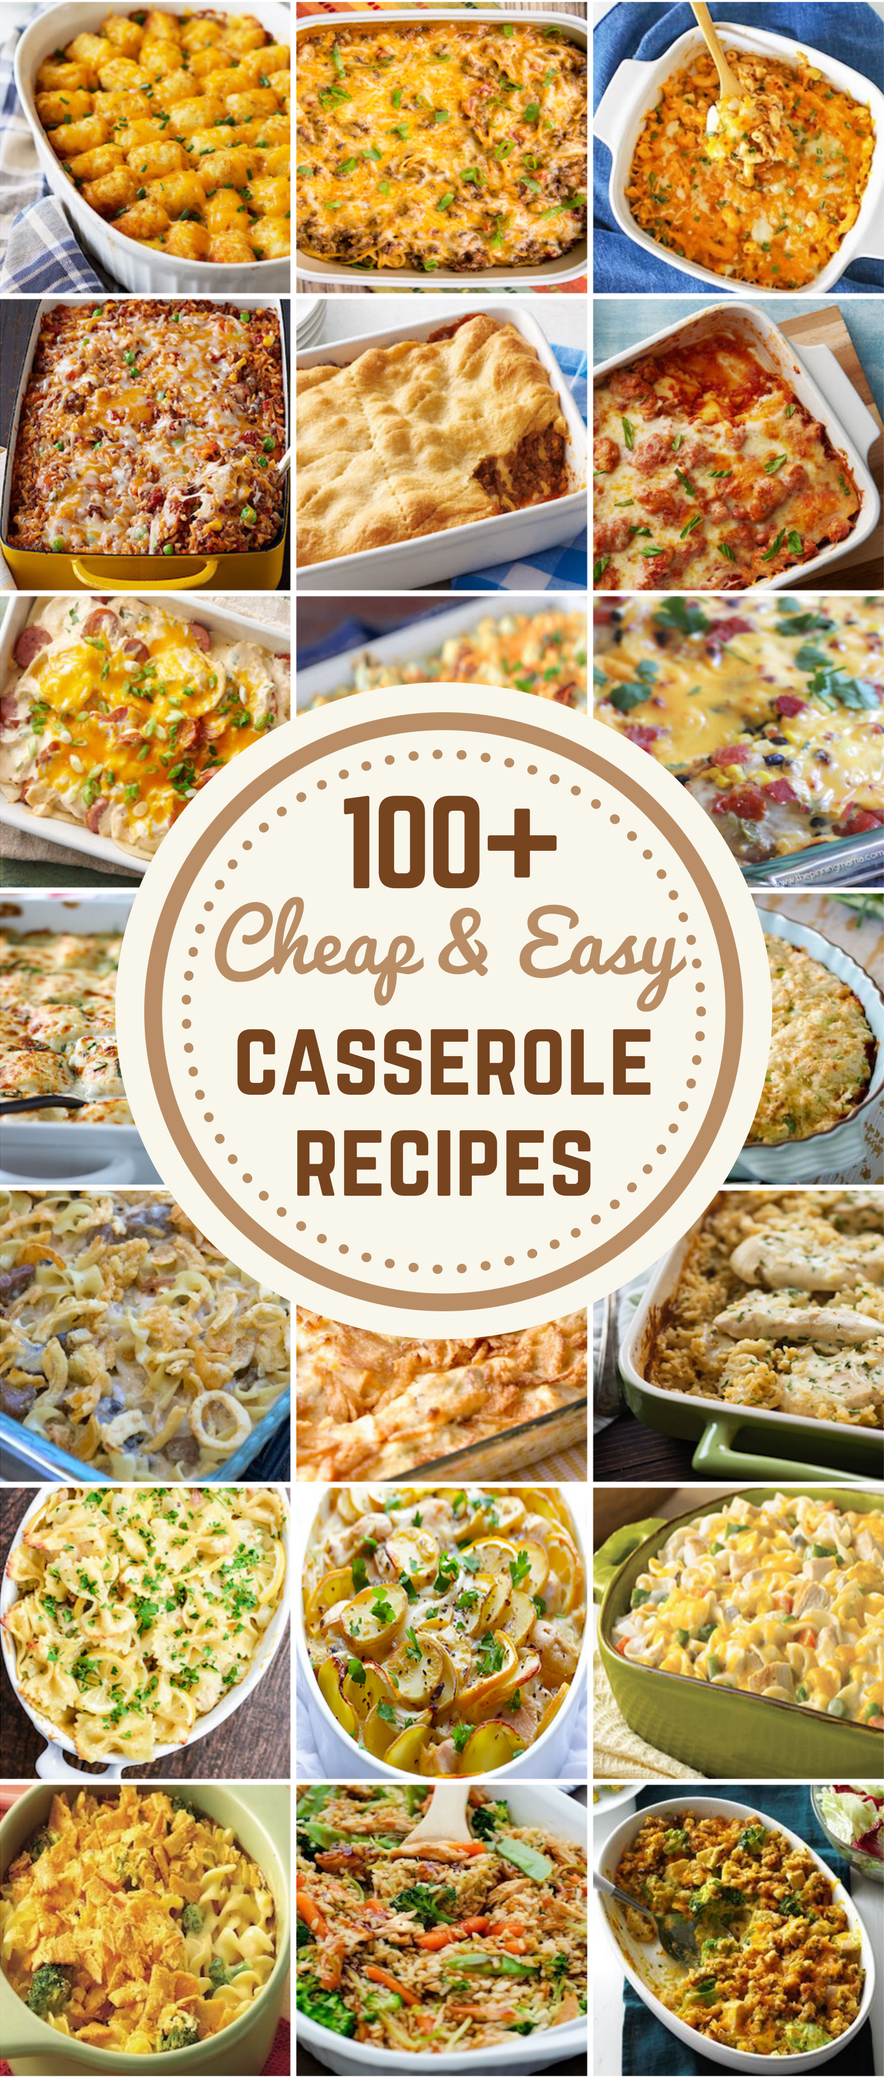 100 Cheap & Easy Casserole Recipes | Prudent Penny Pincher